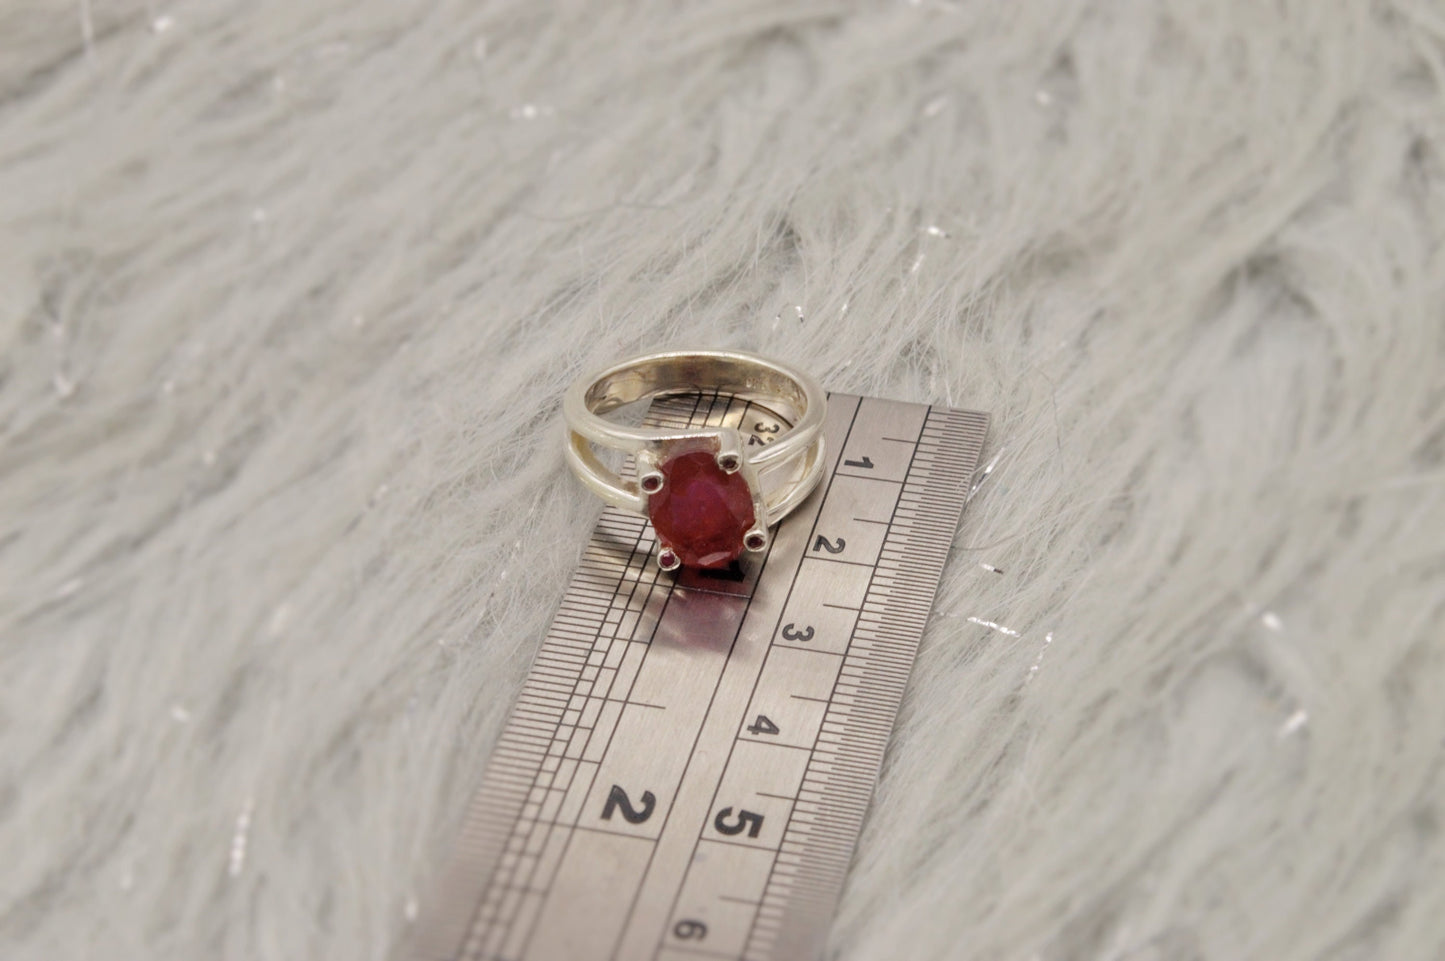 Red Ruby Ring, 925 Sterling Silver Ring, UK Size M, July Birthstone, Handmade Dainty Gemstone Ring, Birthday Gifts, Gift For Her